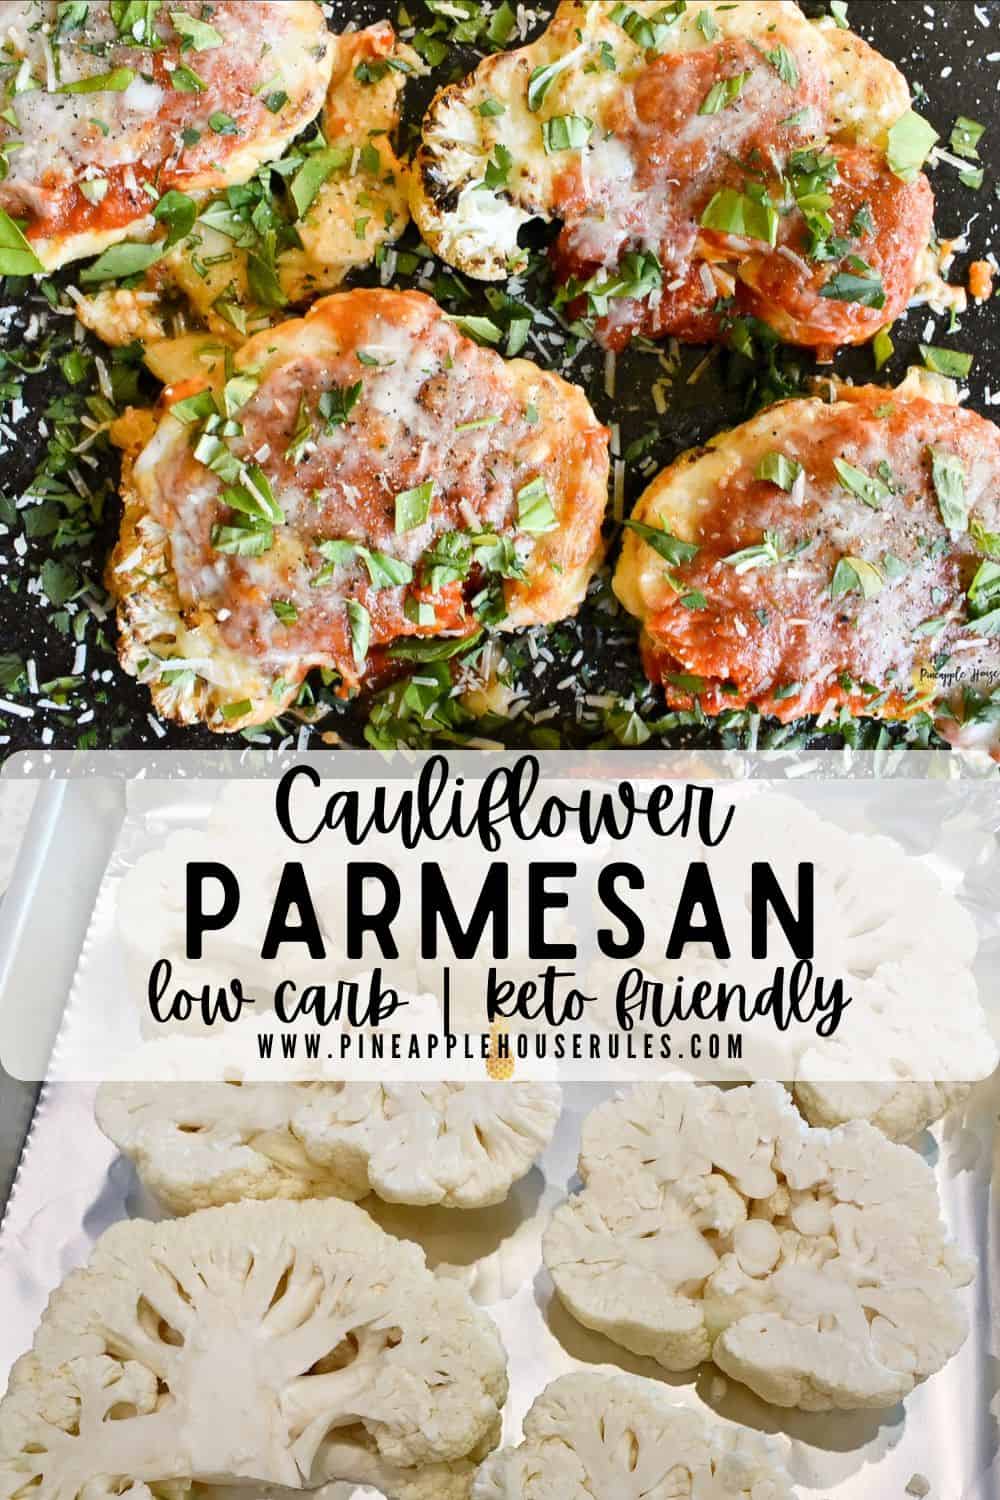 Cauliflower Parmesan is the vegetarian and low carb, Keto friendly version of Chicken Parmesan. What it lacks in meat, it makes up for in flavor! Cauliflower Parmesan | Cauliflower Parmesan Bake | Cauliflower Parmesan Steaks | Cauliflower Parmesan Recipes | Cauliflower Parmesan Casserole | Low Carb Recipes | Low Carb Dinner | Low Carb Meals | Low Carb Dinner Recipes | Keto Recipes | Keto Diet for Beginners | Keto Meals | Cauliflower Steaks | Cauliflower Recipes